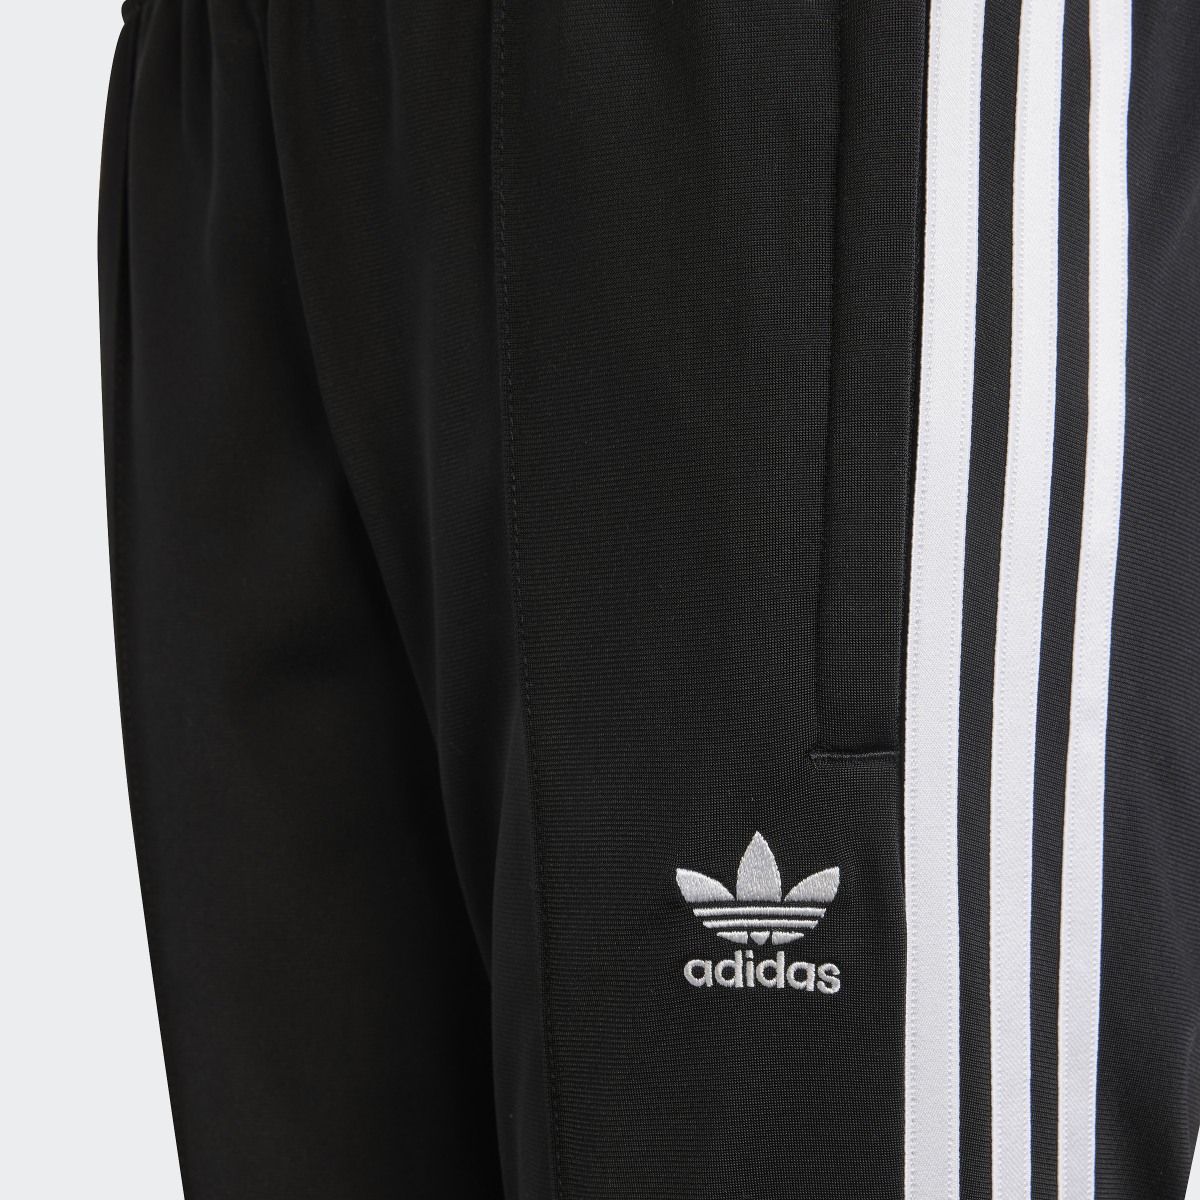 Adidas 3-Stripes Flared Tracksuit Bottoms. 4